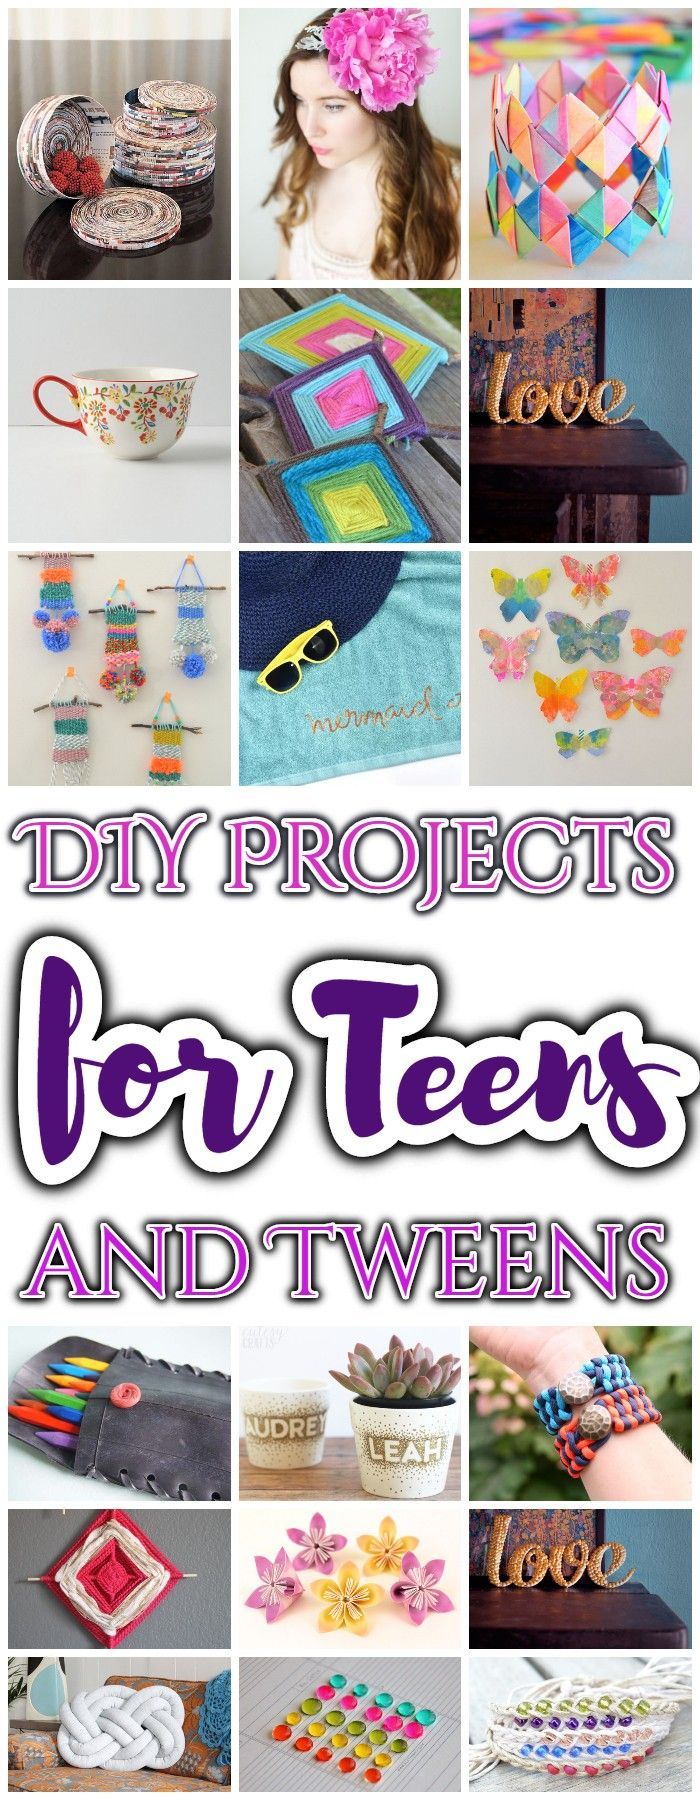 25 Cheap DIY Projects for Teens and Tweens -   16 diy projects For Mom kids ideas